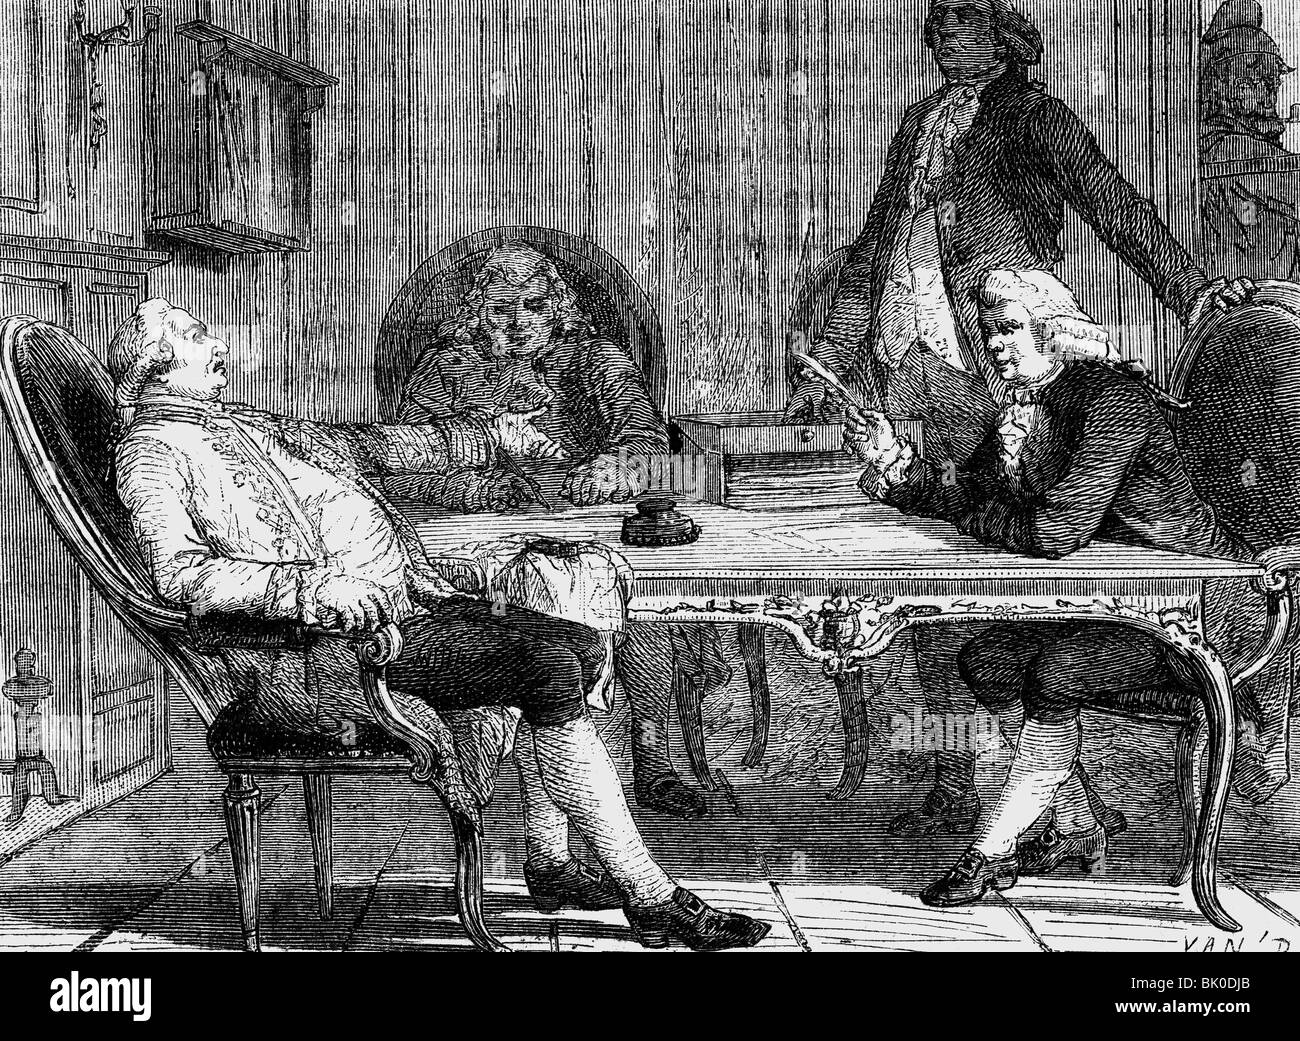 Louis XVI, 23.8.1754 - 21.1.1793, King of France 10.5.1774 - 21.9.1792, trial, with his defendants, wood engraving, 19th century, , Stock Photo